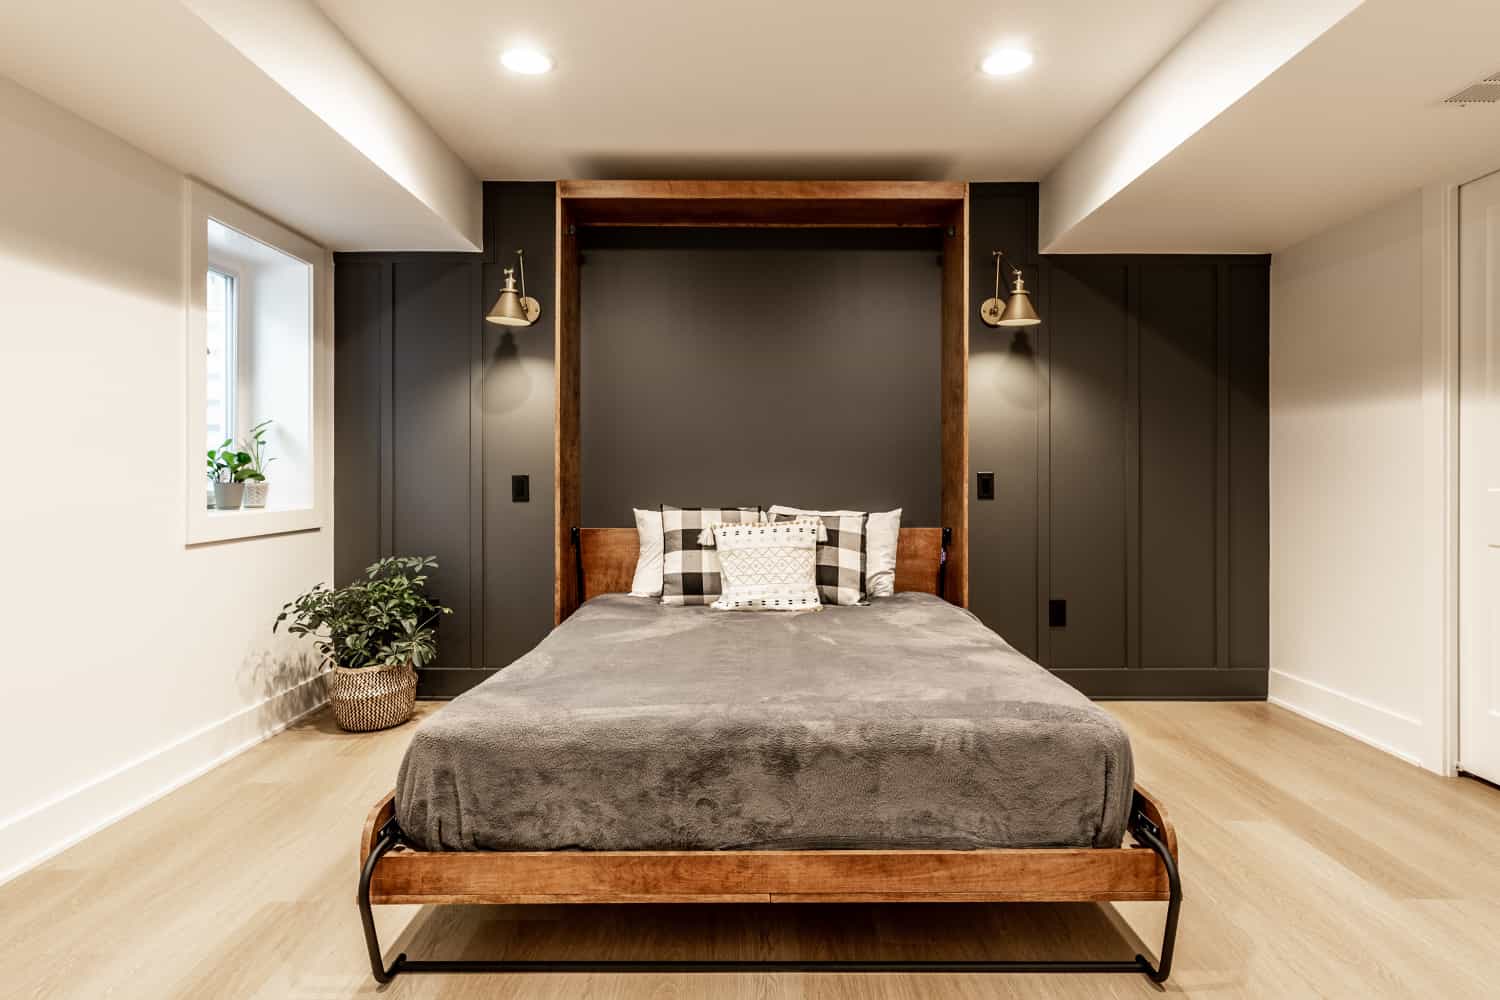 Nicholas Design Build | A remodelled bedroom with a bed in the middle of the room.